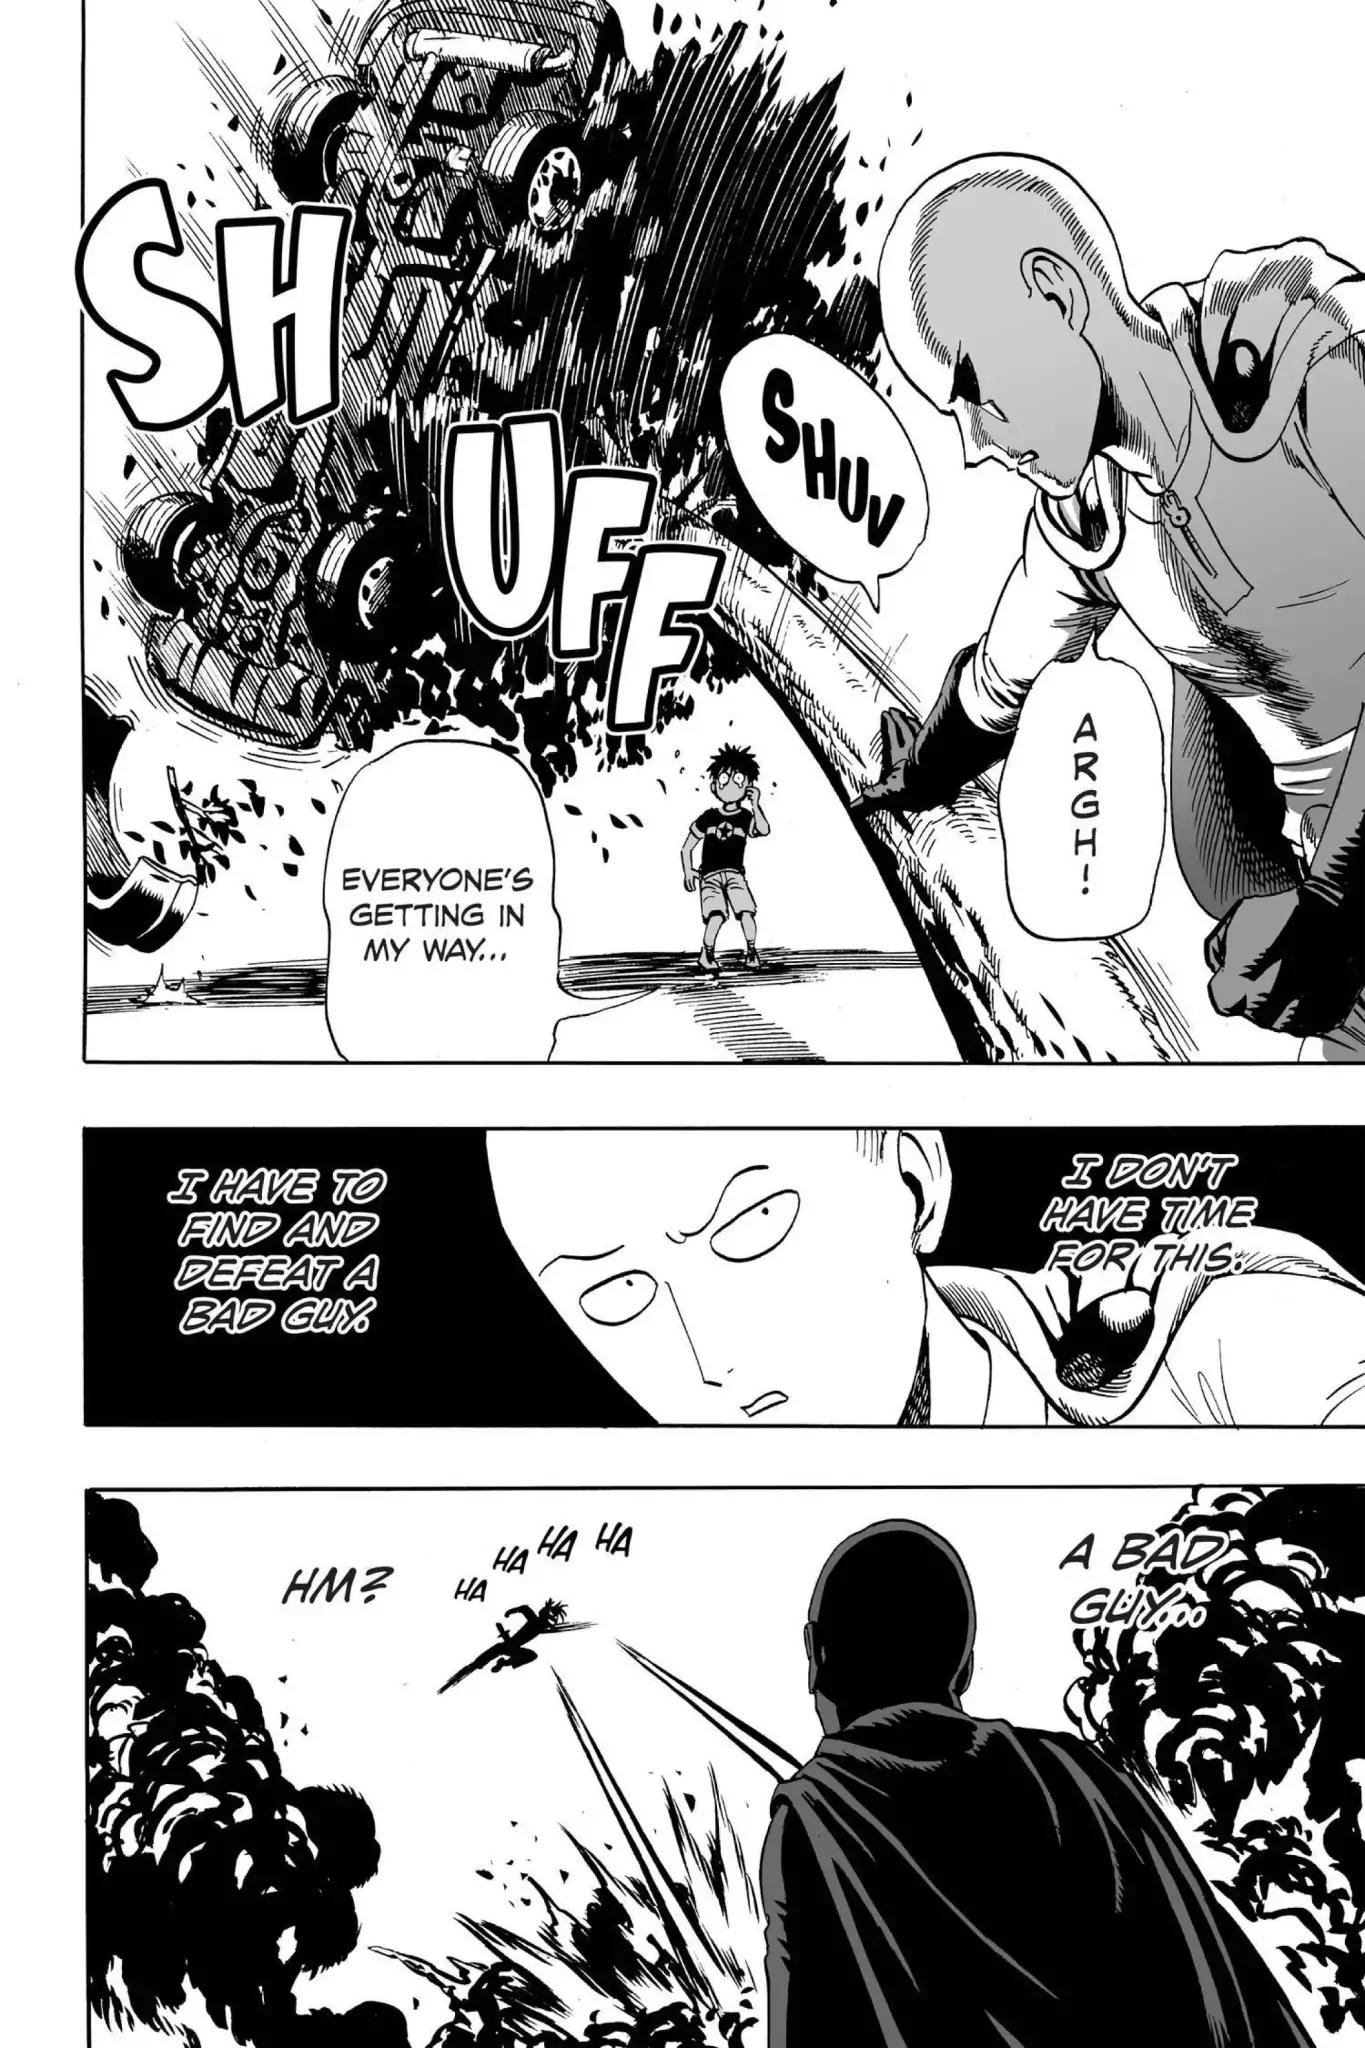 One-Punch Man chapter 19 page 23